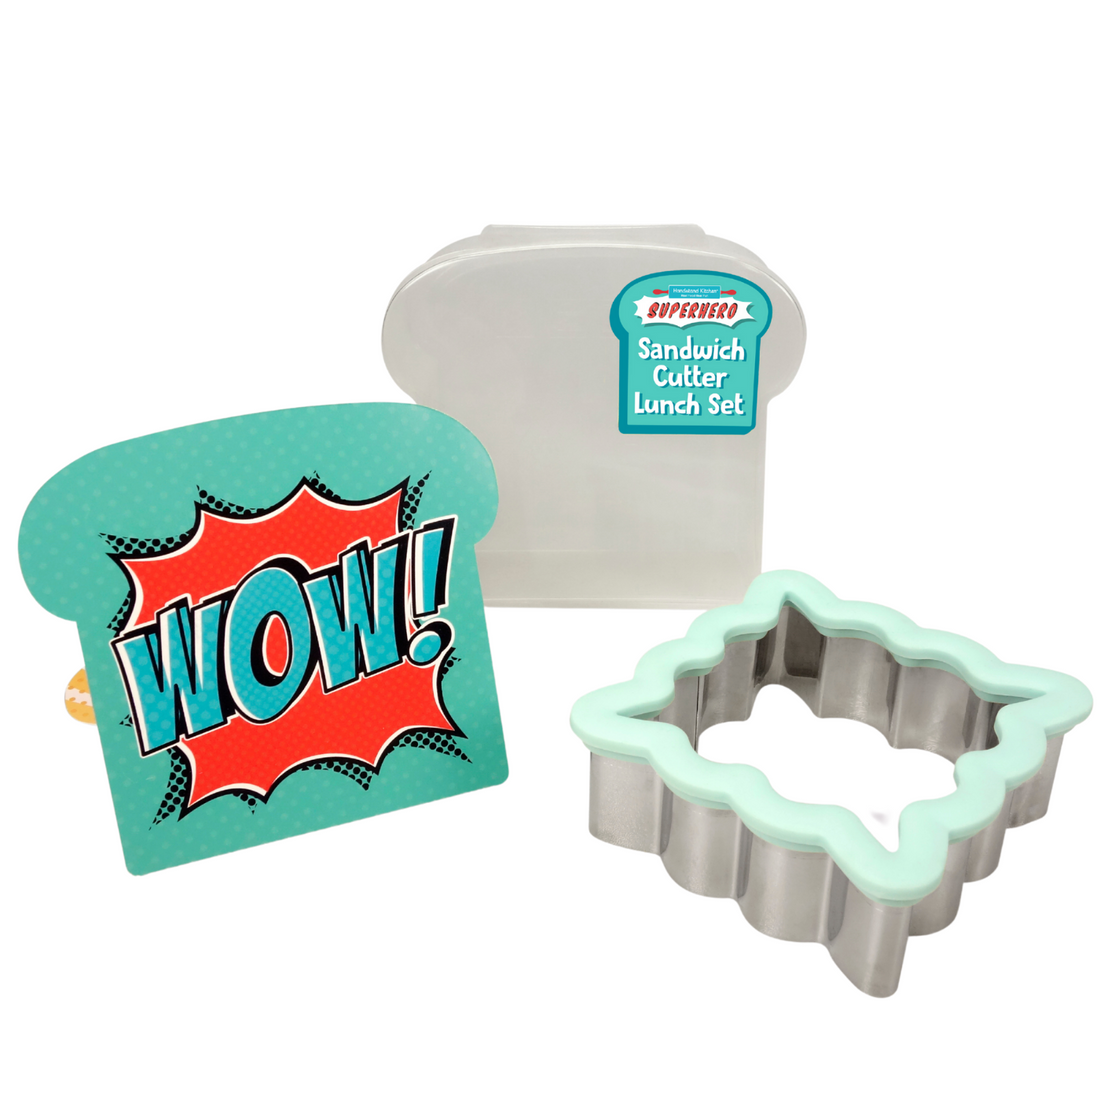 Out of box image of SUPERHERO Sandwich Cutter Lunch Set